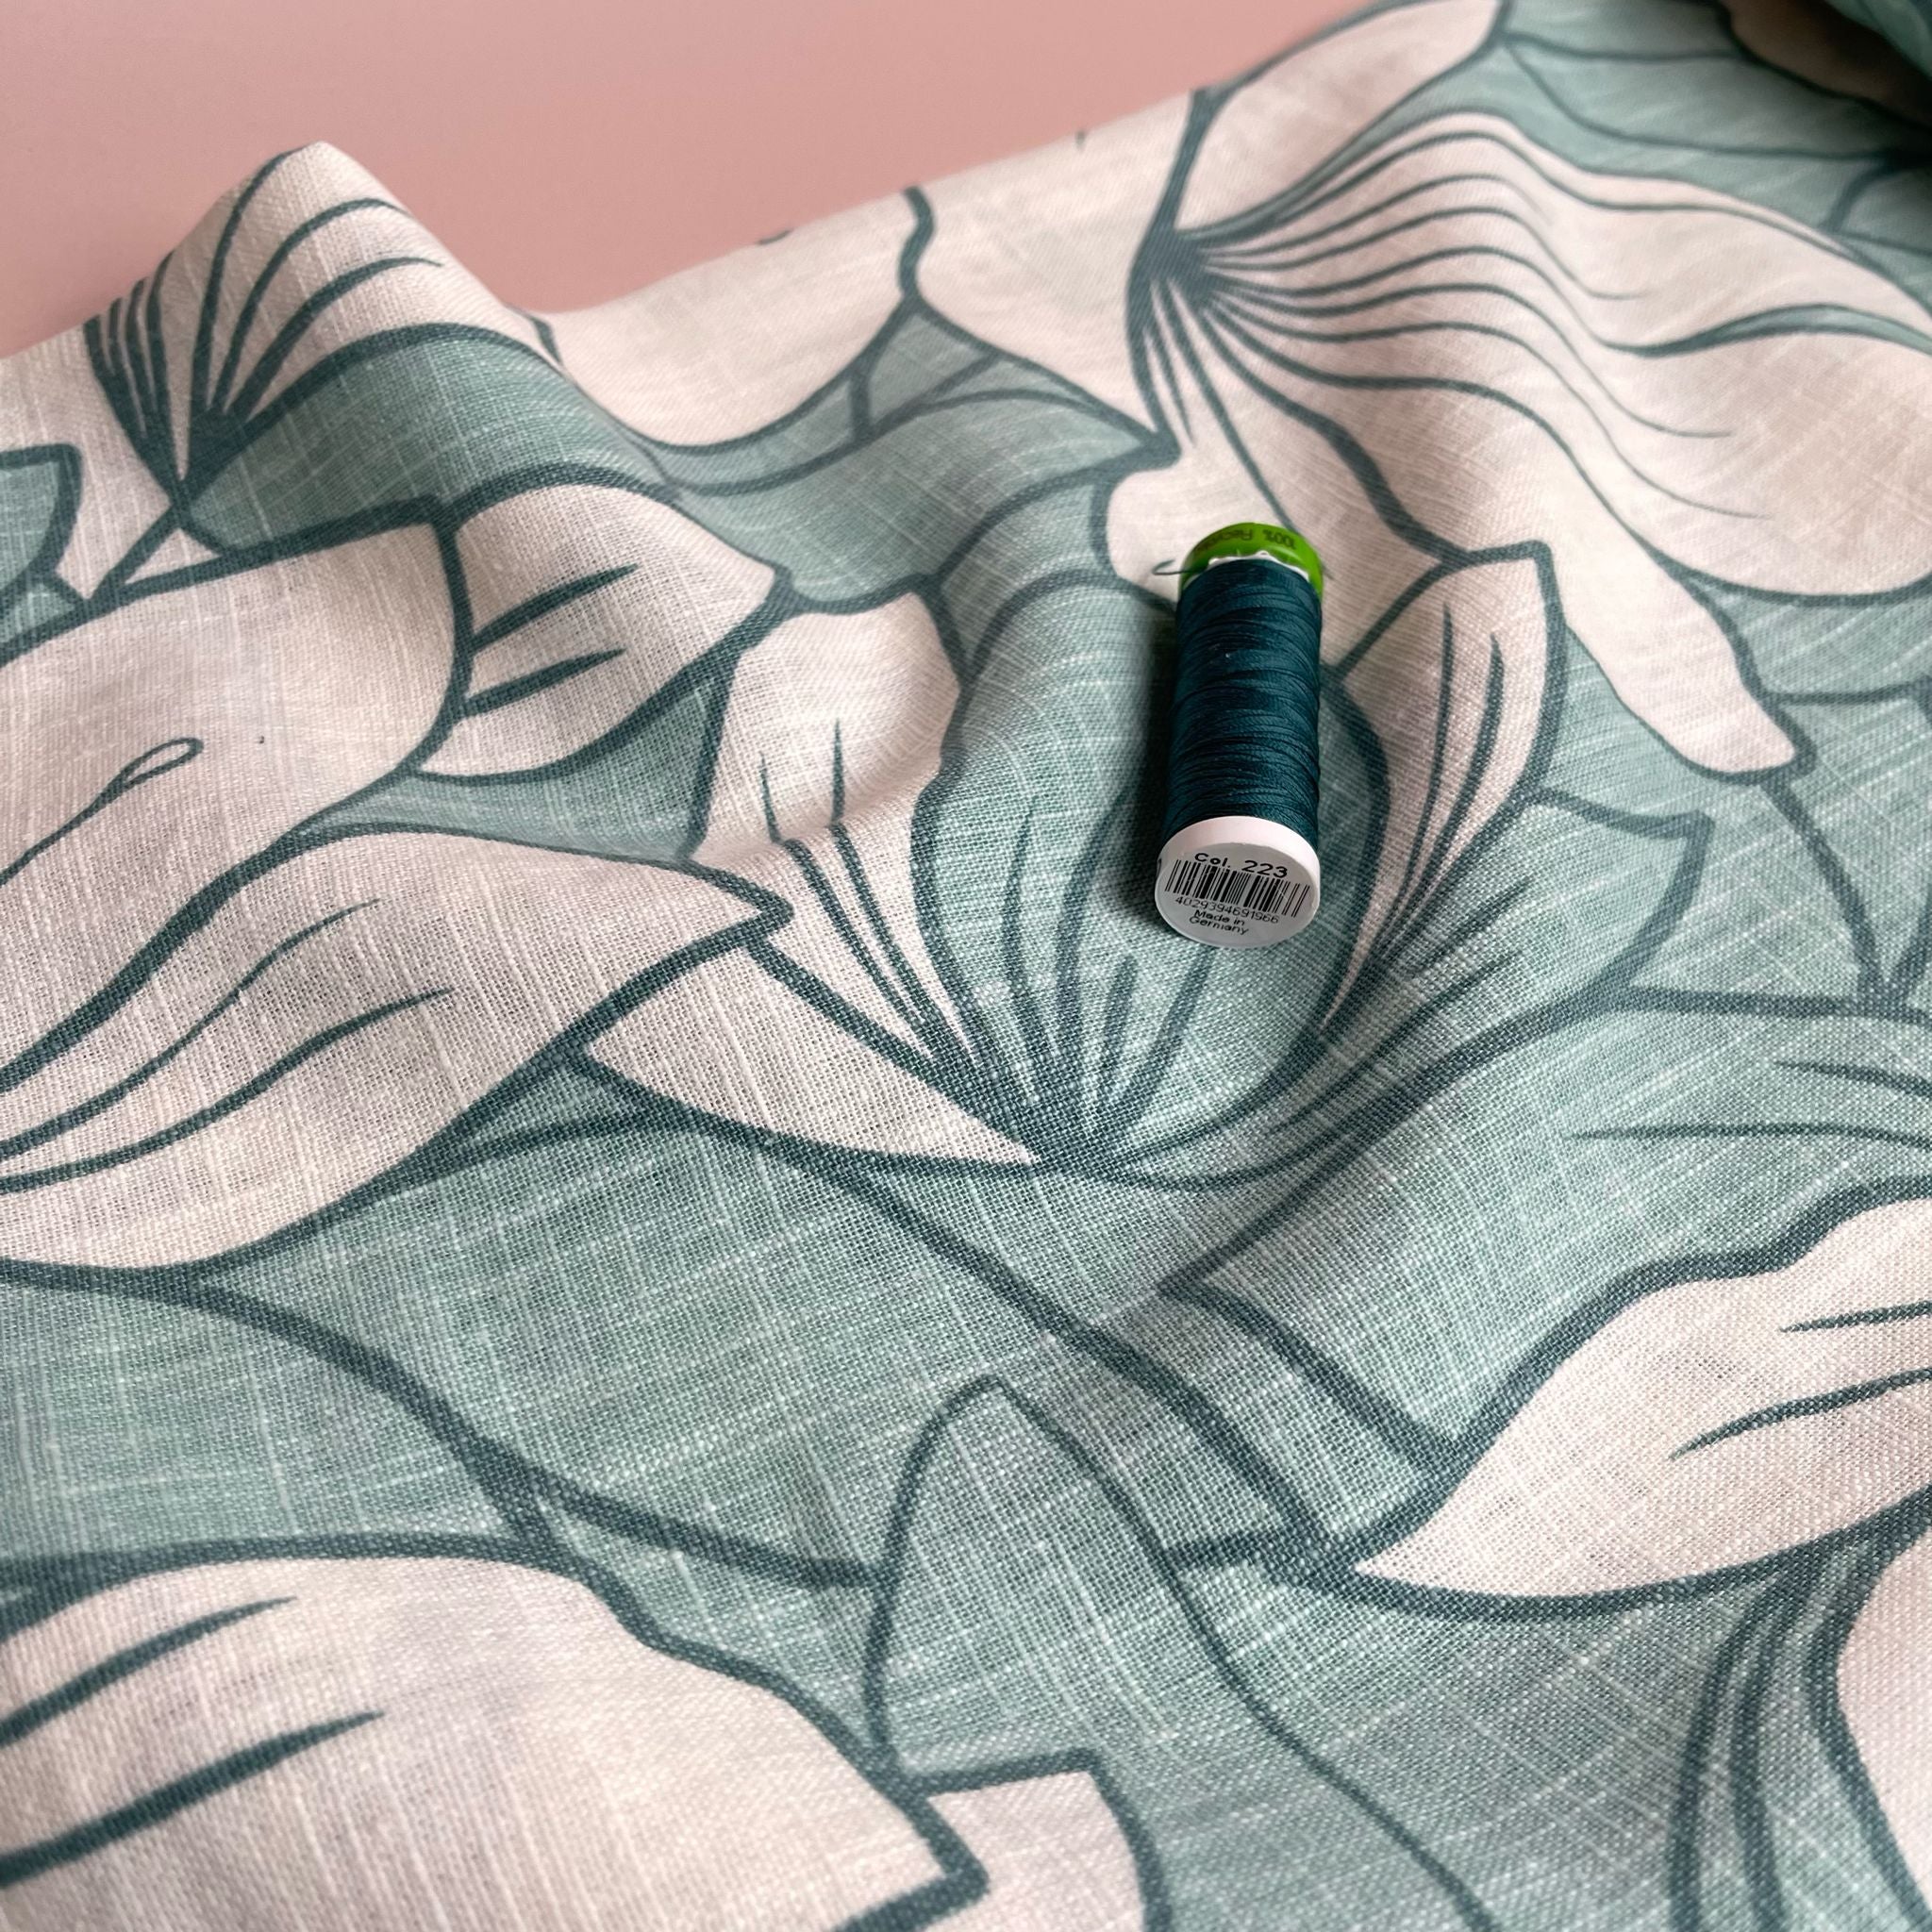 REMNANT 0.55 Metre - Pale Teal Leaves on Soft Washed Linen Cotton Fabric